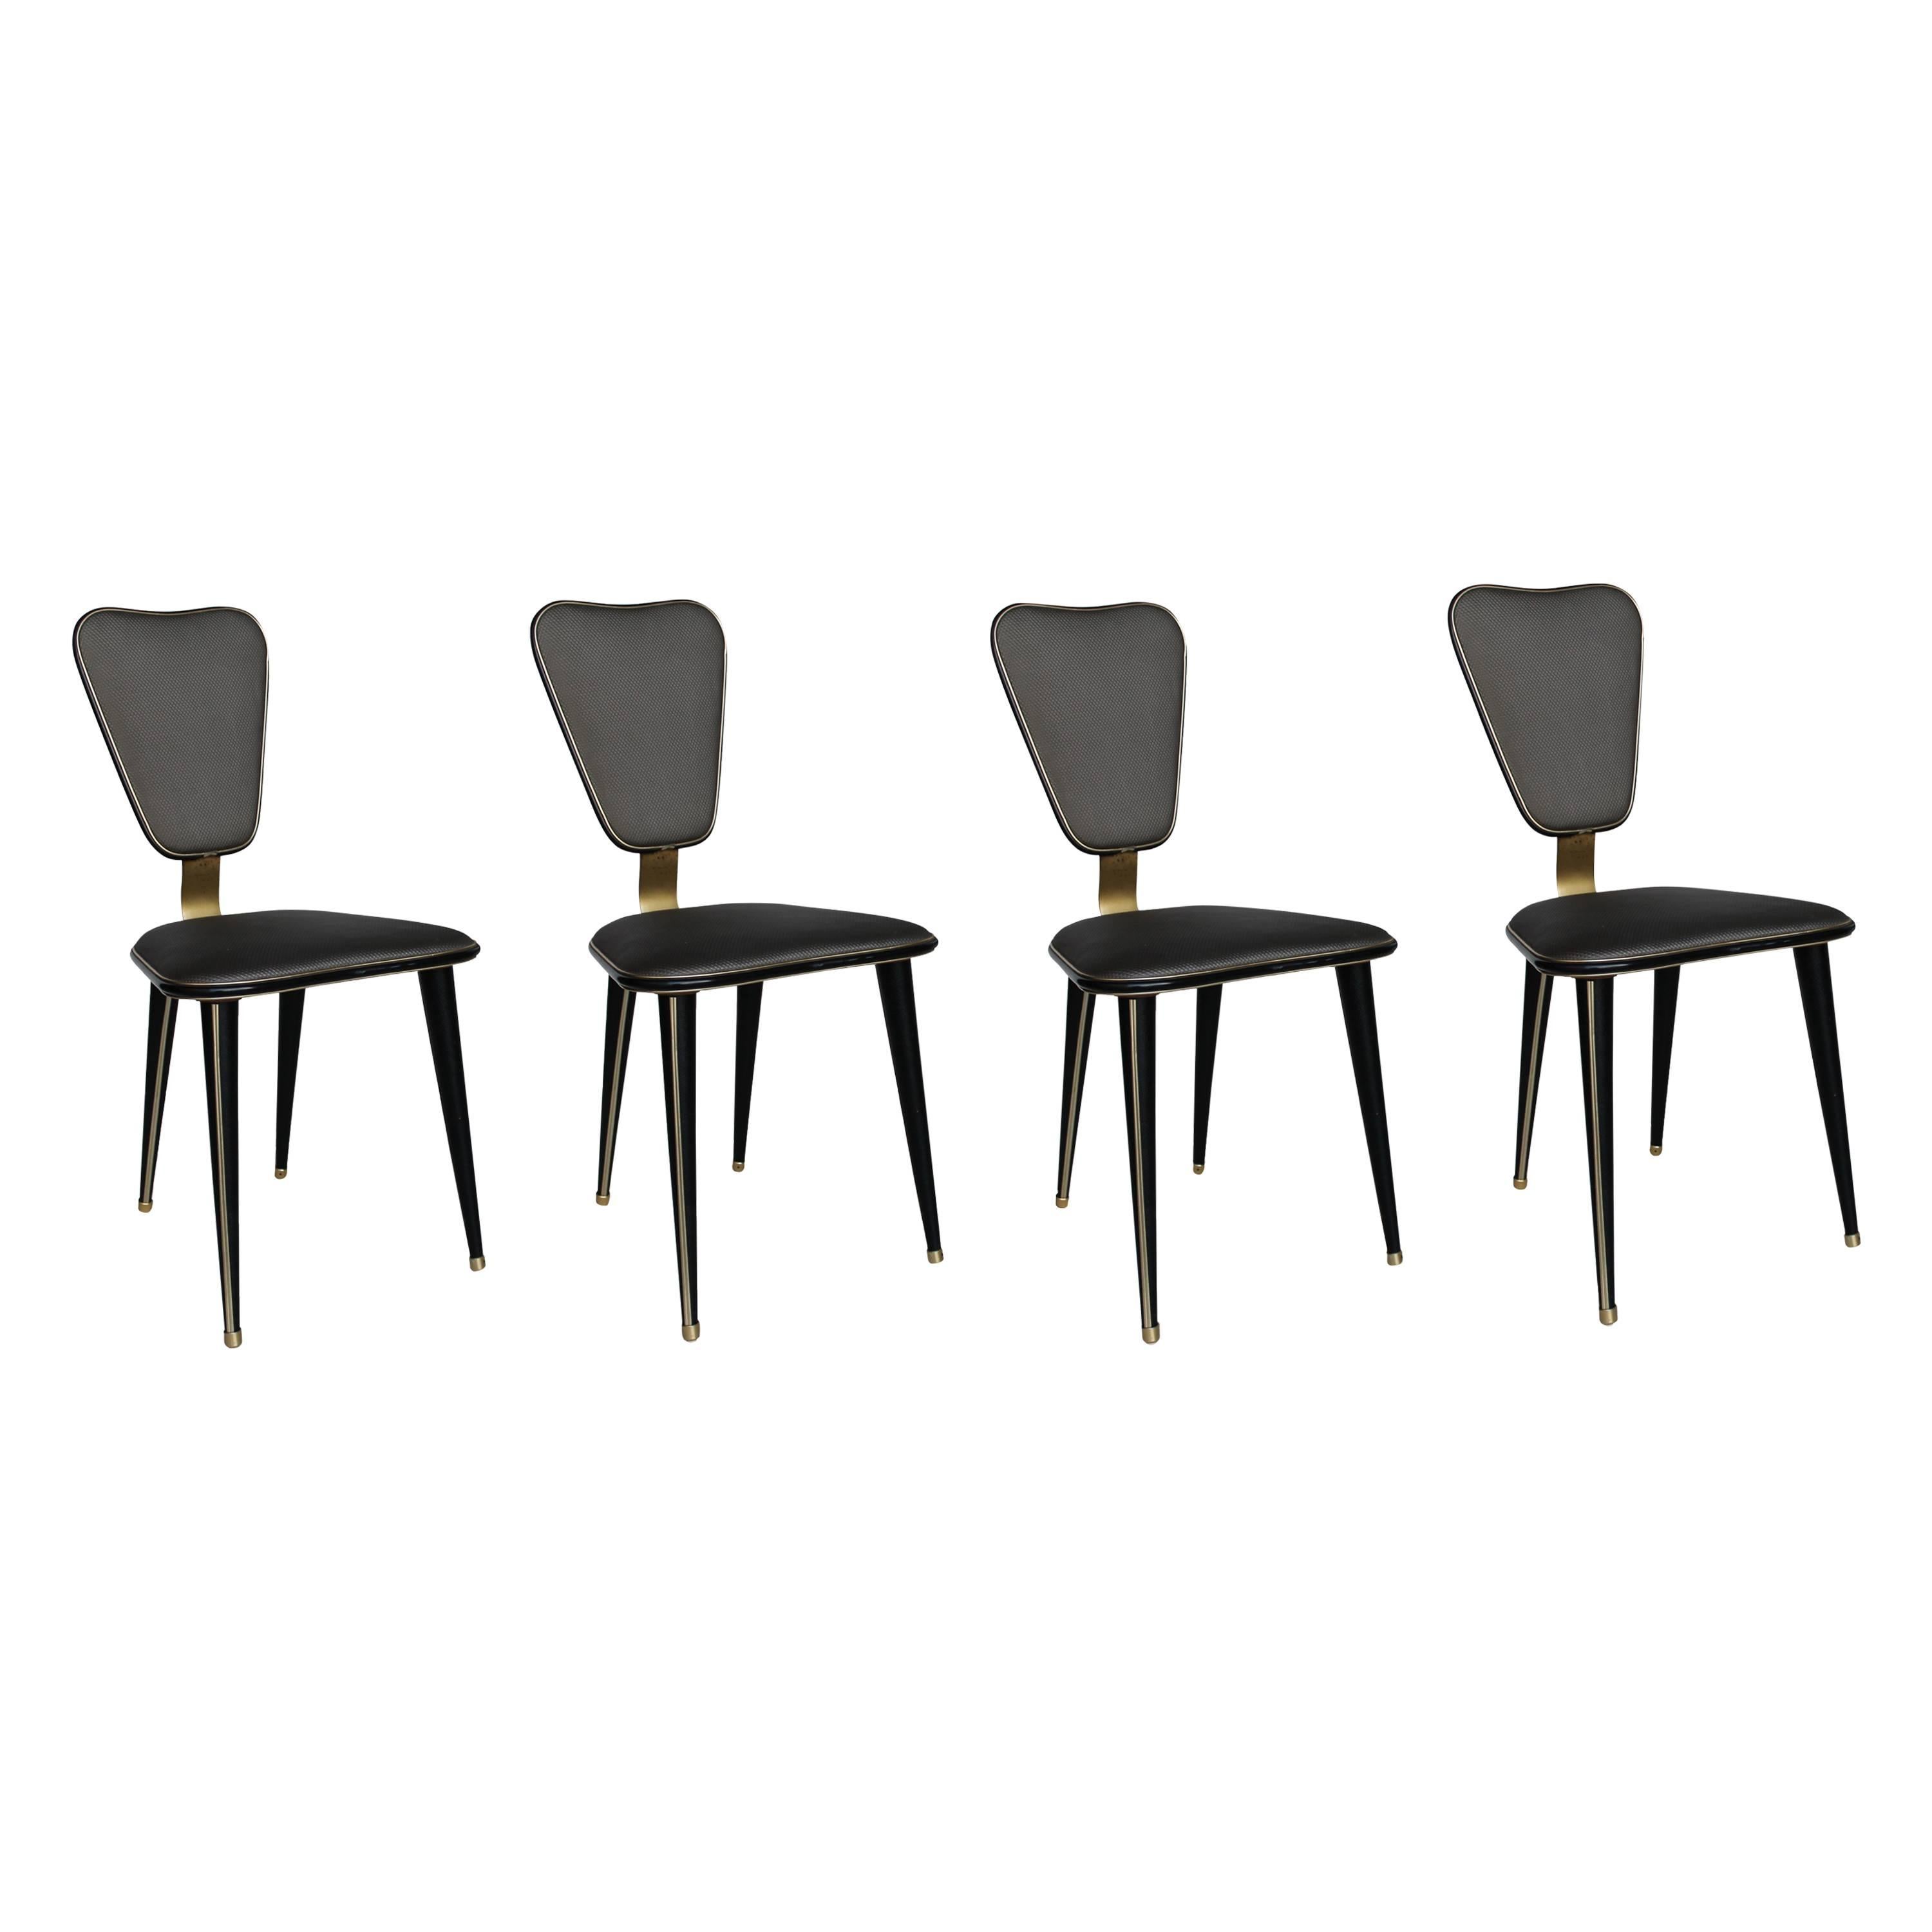 Four Chairs by Umberto Mascagni, Harrods Series